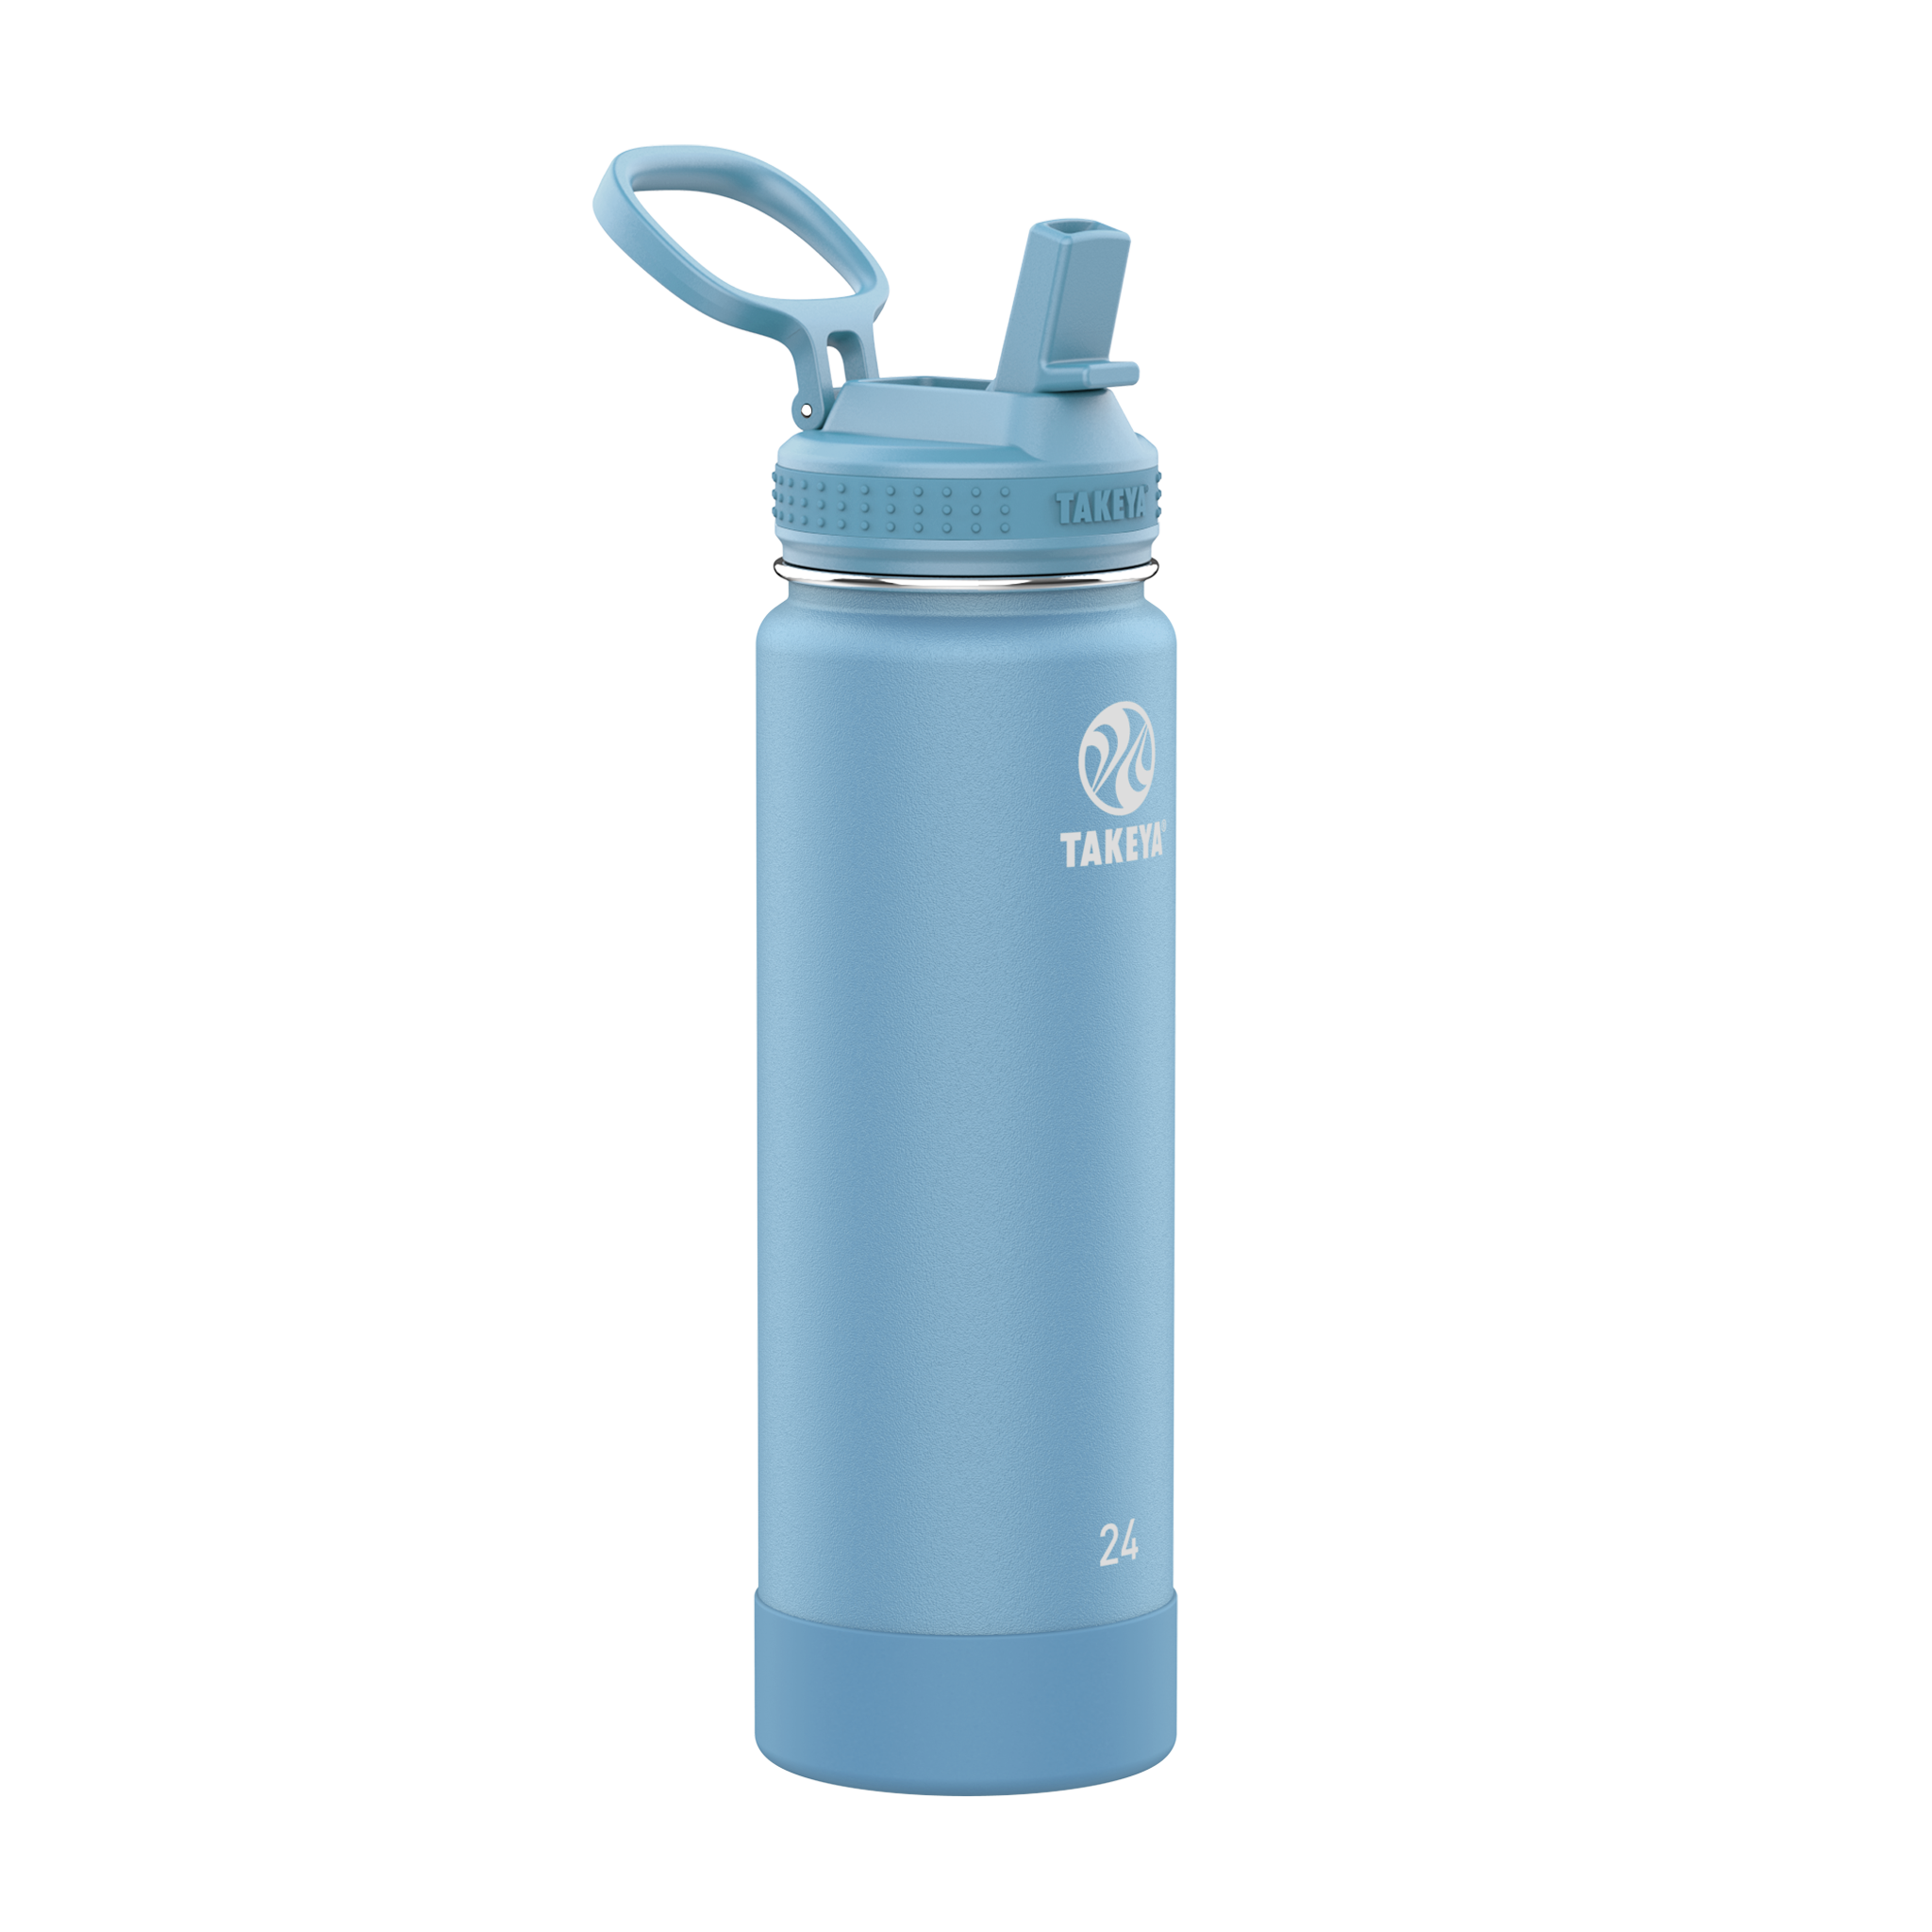 Personalized Water Bottle With Straw Lid, 32 Oz, Custom Stainless